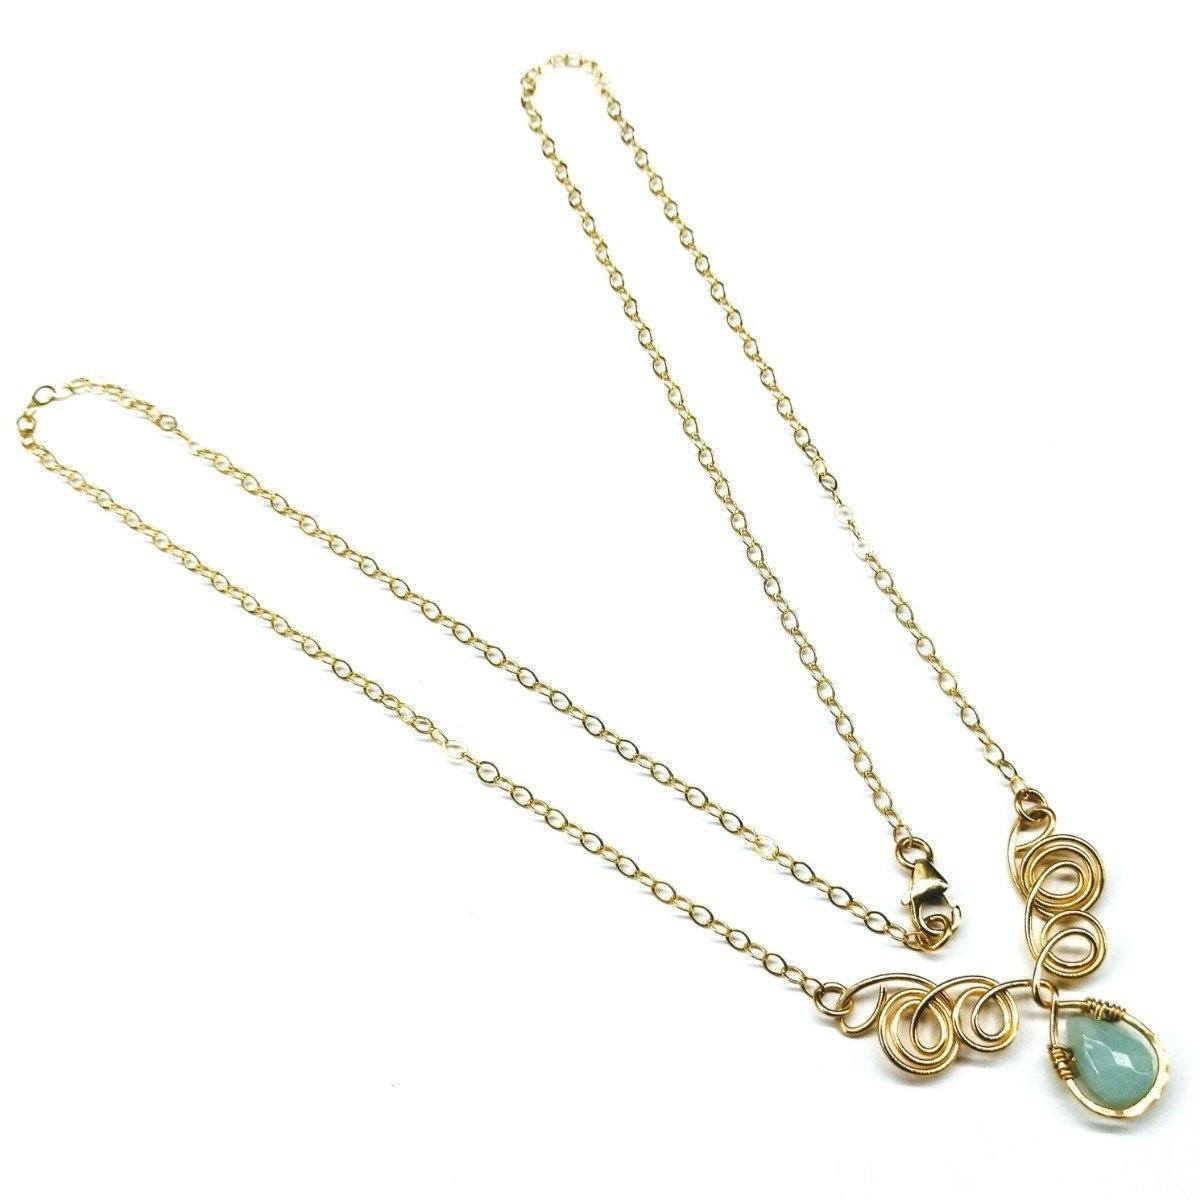 Handcrafted Gold-Filled Mint Gemstone Drop Necklace - Unique Wire Sculpted Design with Adjustable Length and Lobster Clasp - Necklaces - Bijou Her -  -  - 